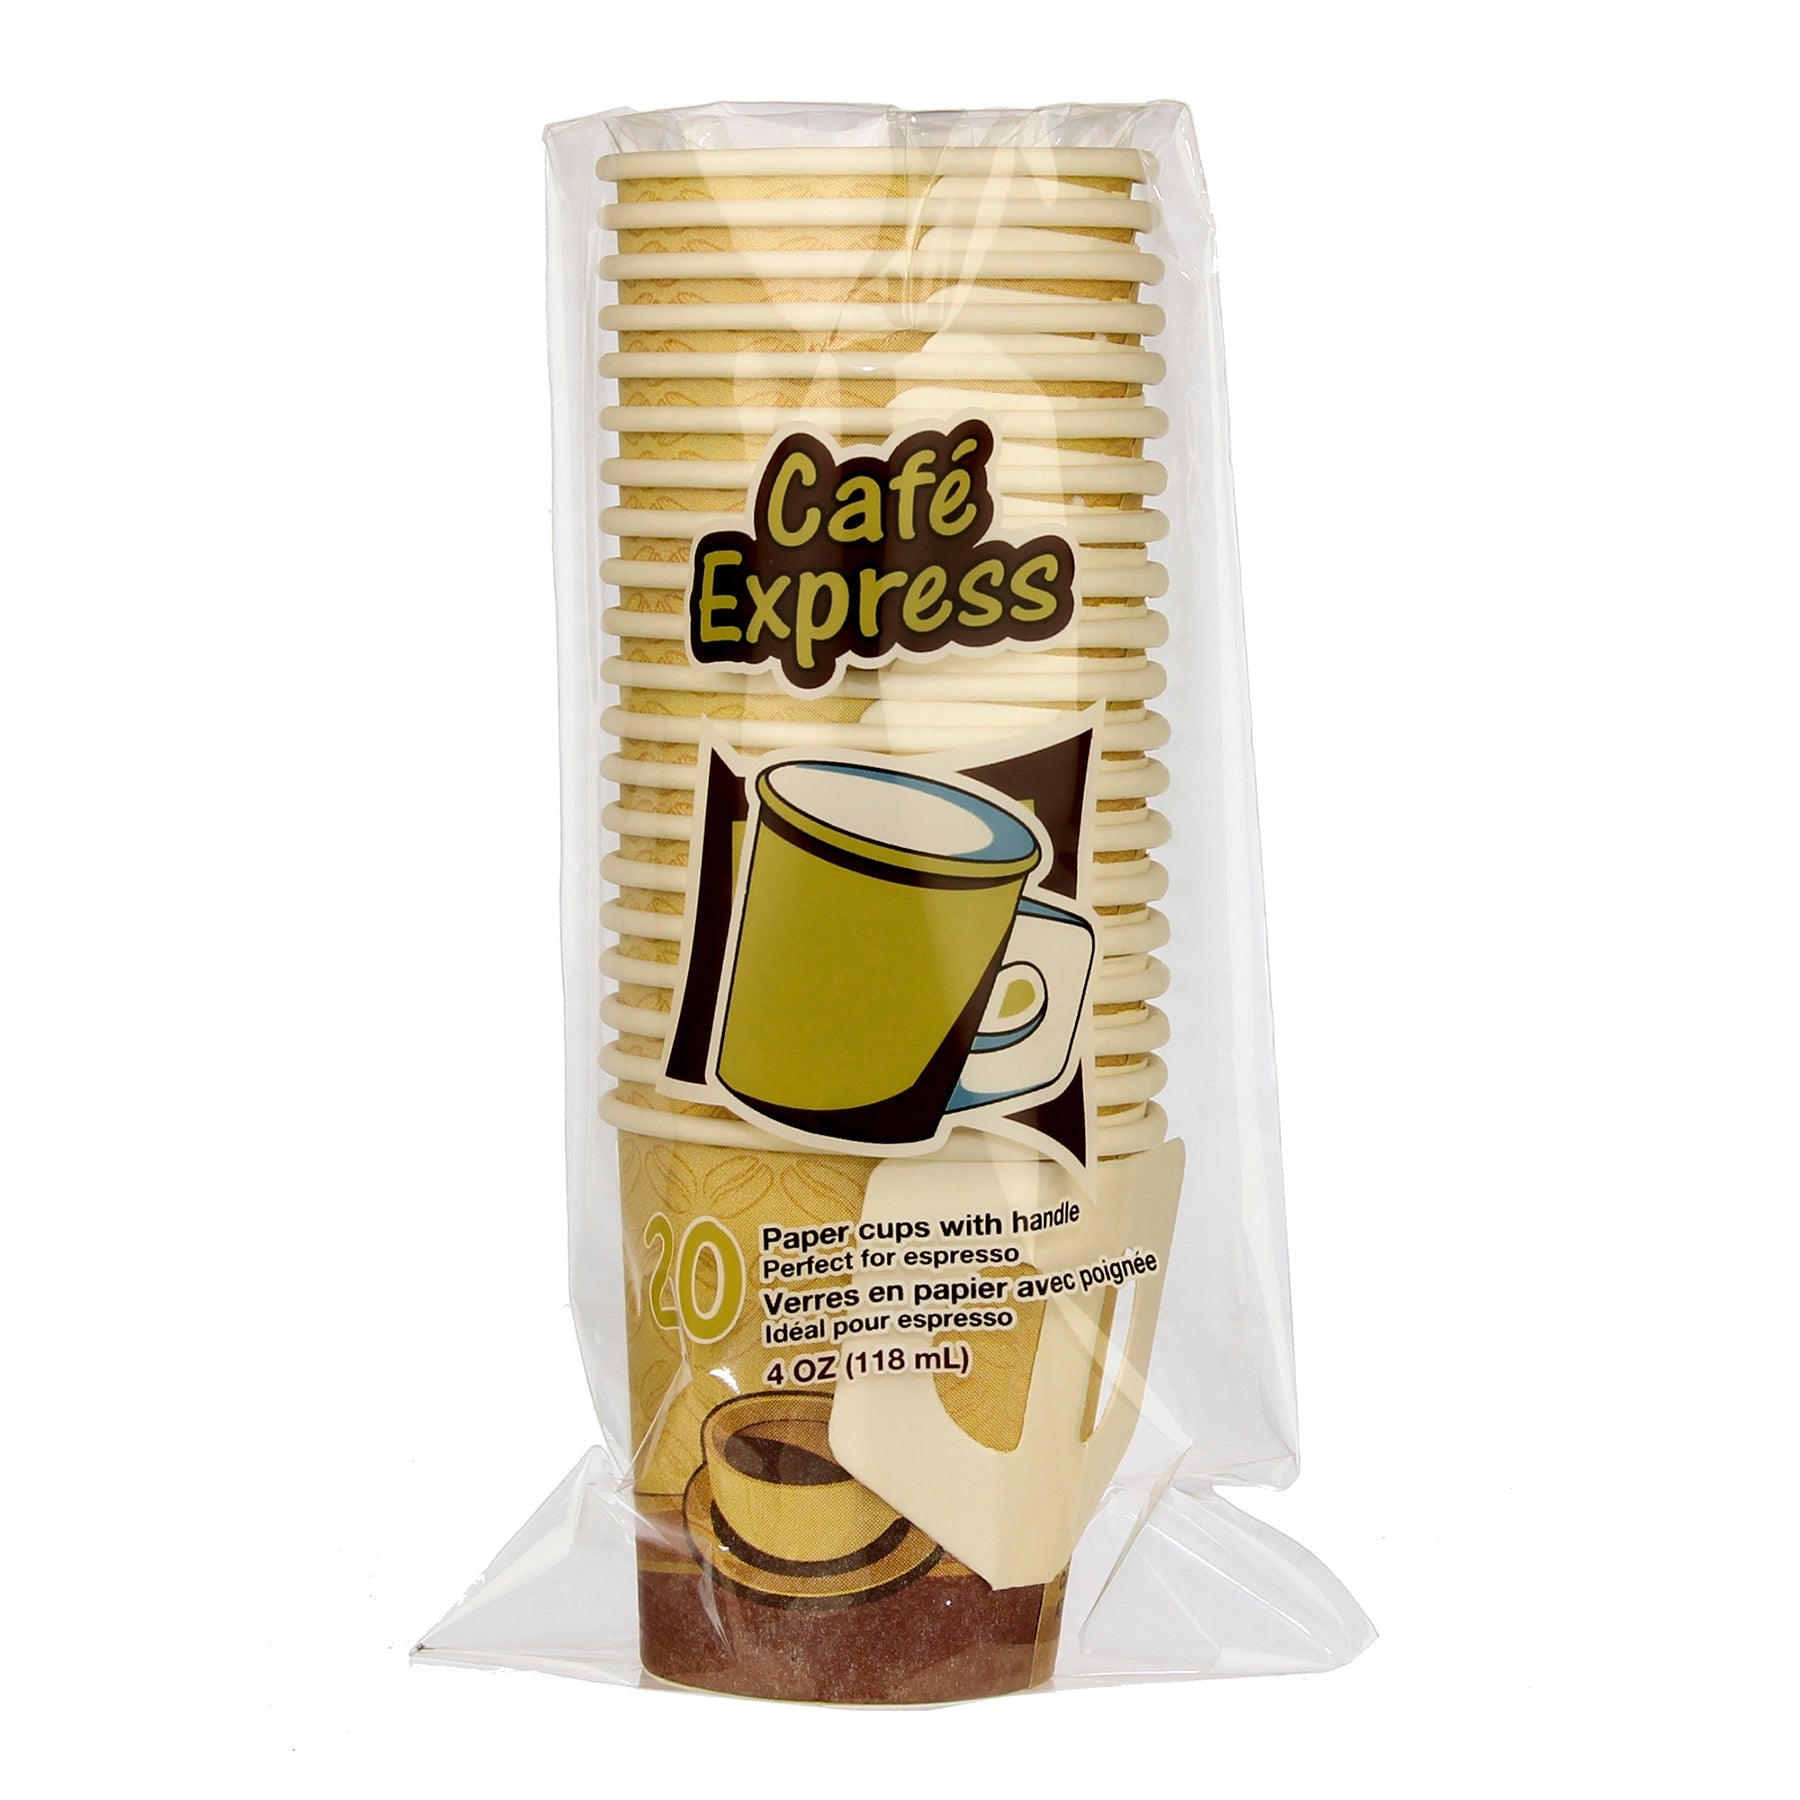 Café Express 20 Paper Cups with Handle Coffee Bean Print 4oz